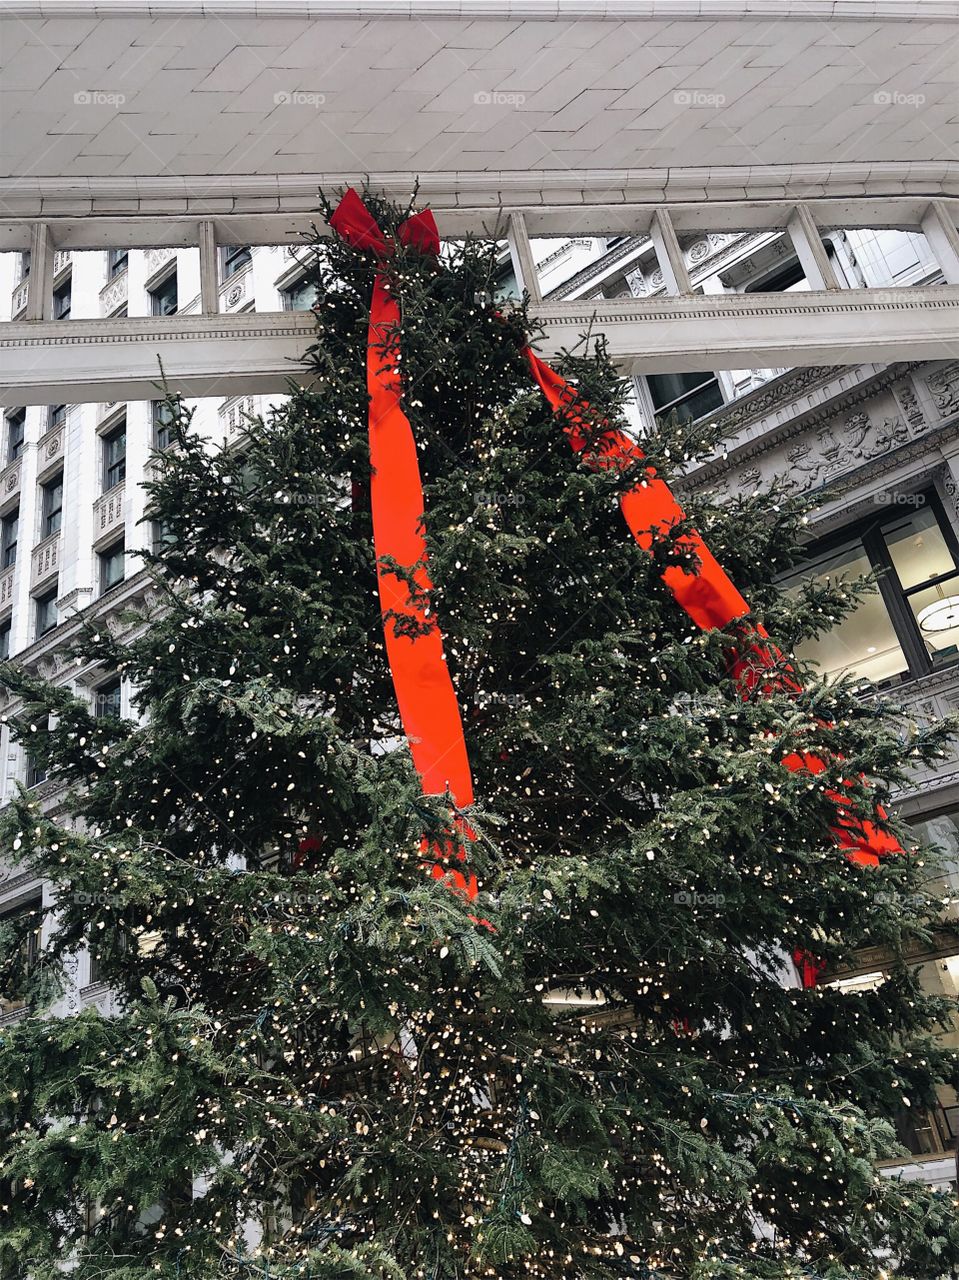 A large Holiday tree in Chicago